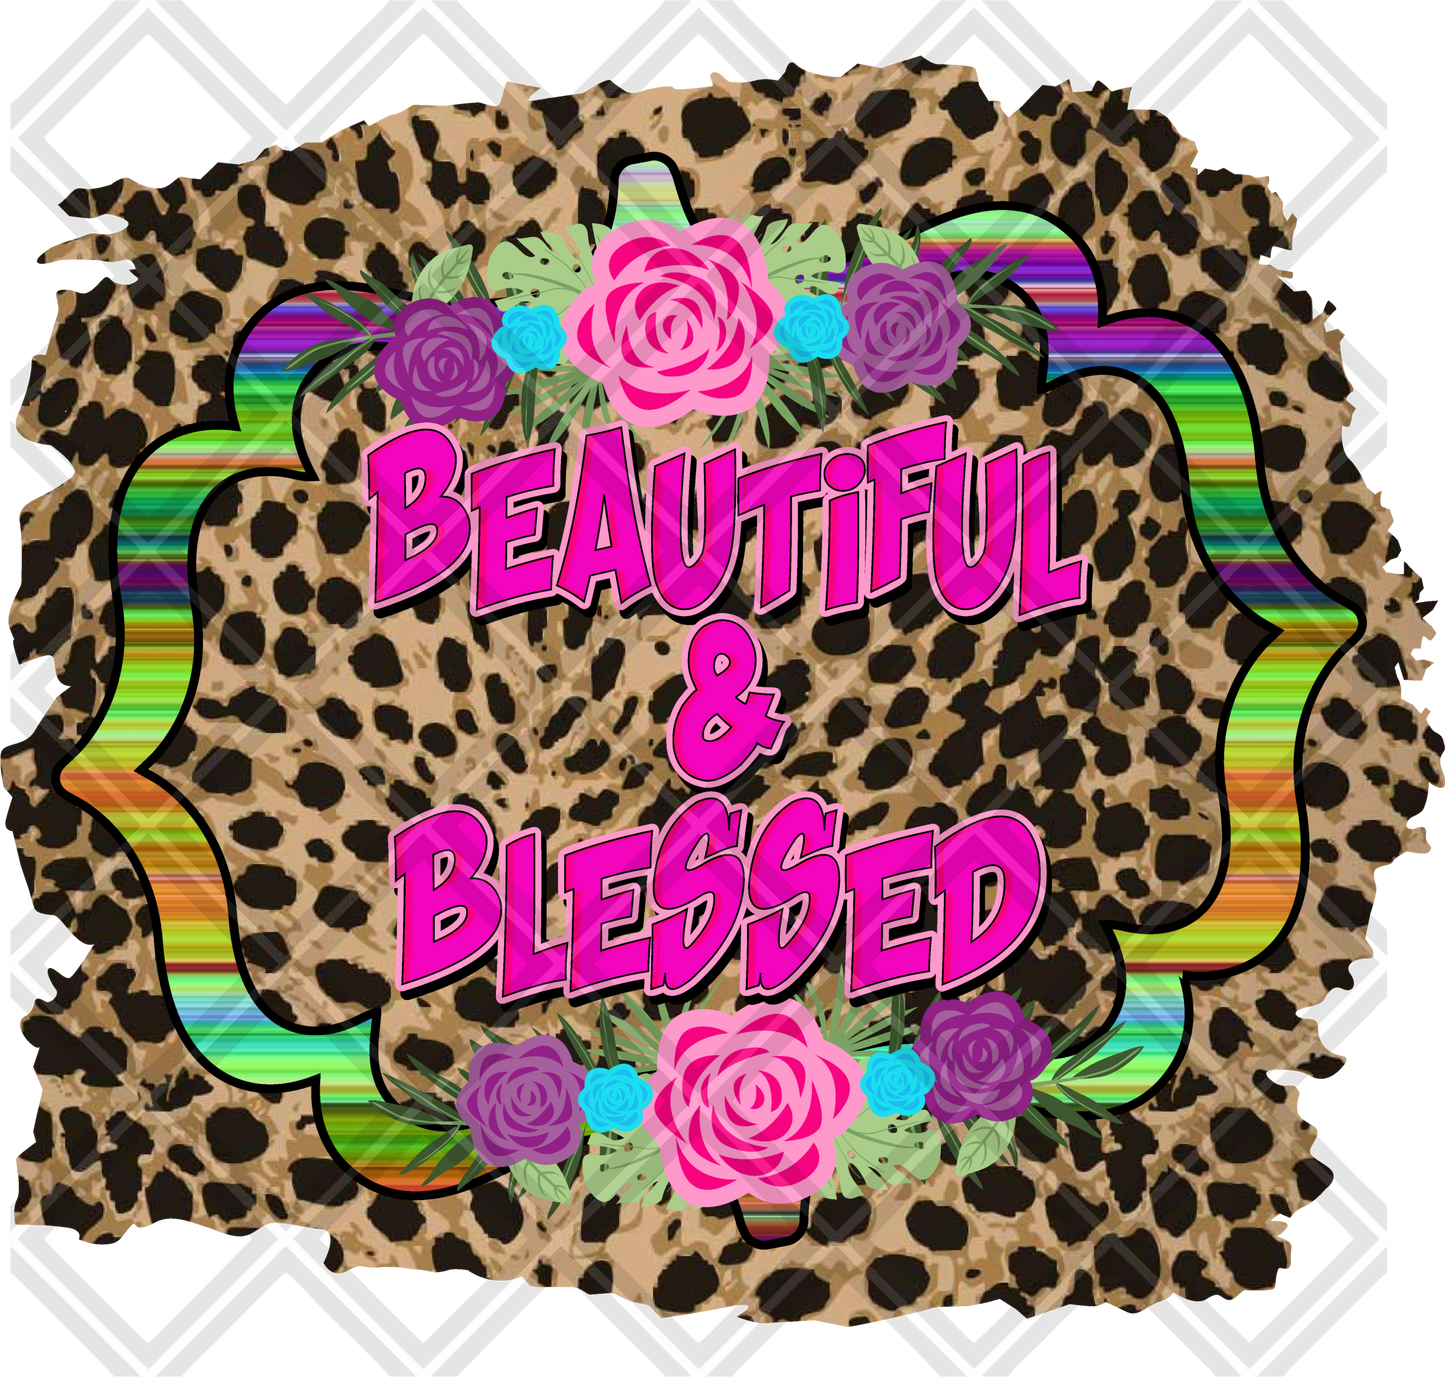 BEAUTIFUL and blessed leopard TRANSFERPRINT TO ORDER